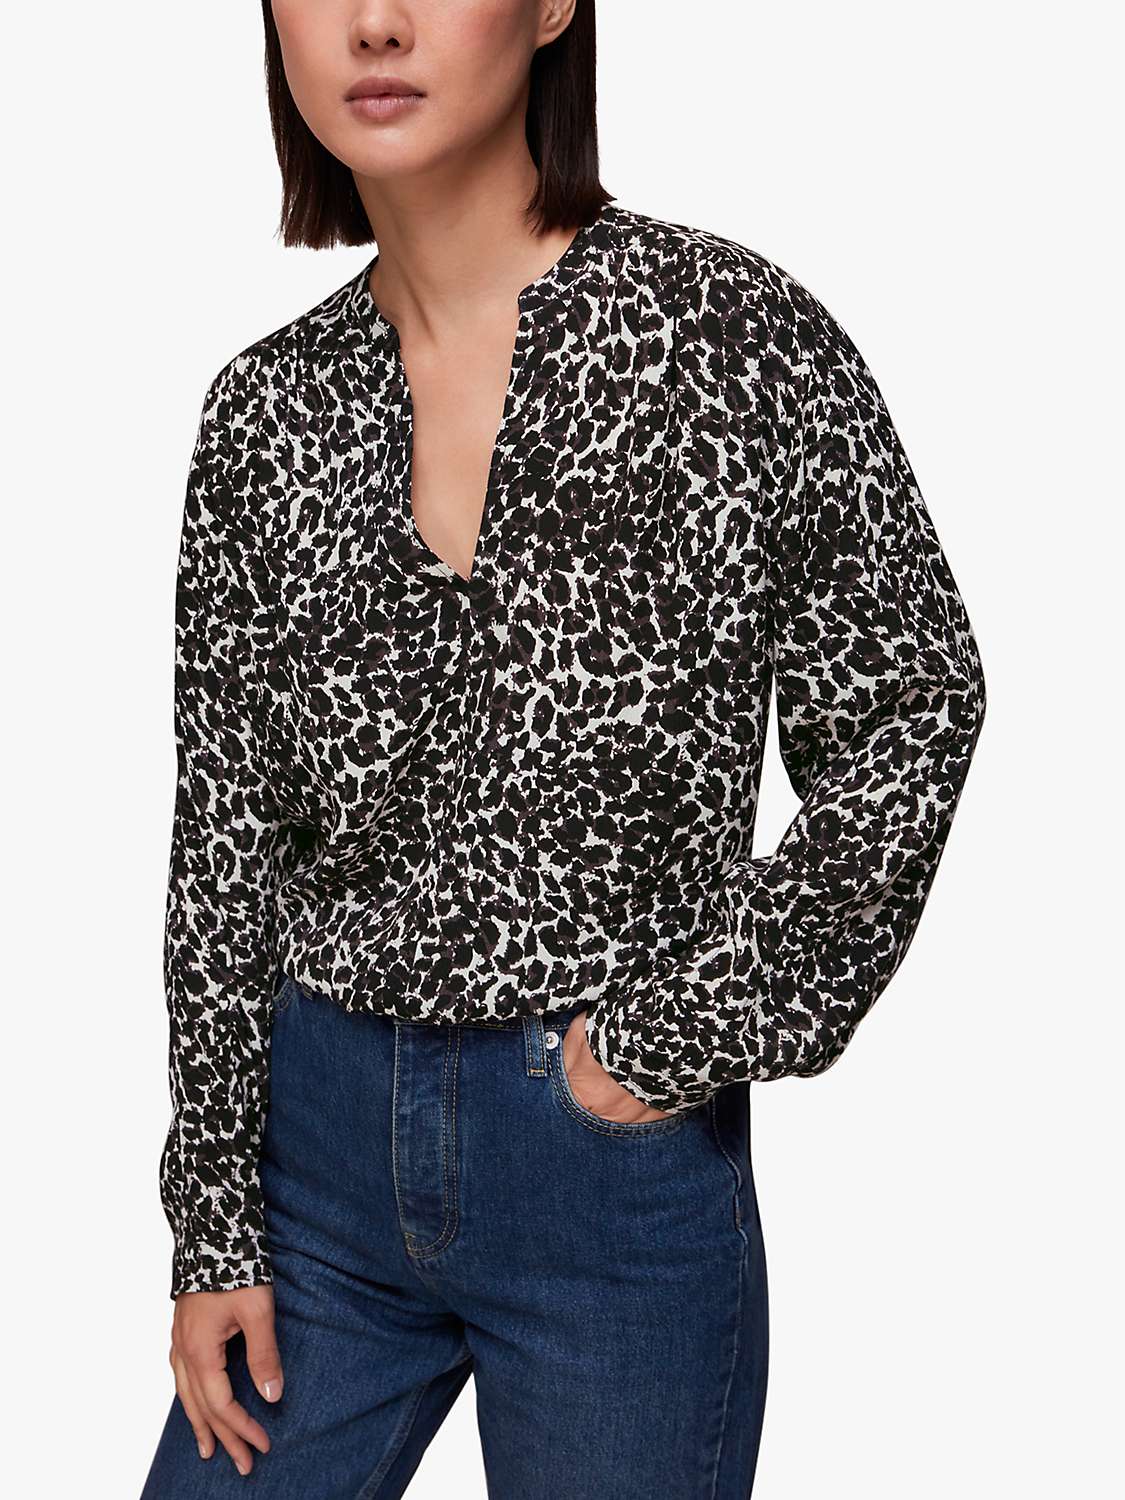 Buy Whistles Shadow Leopard Print Blouse, Black/White Online at johnlewis.com